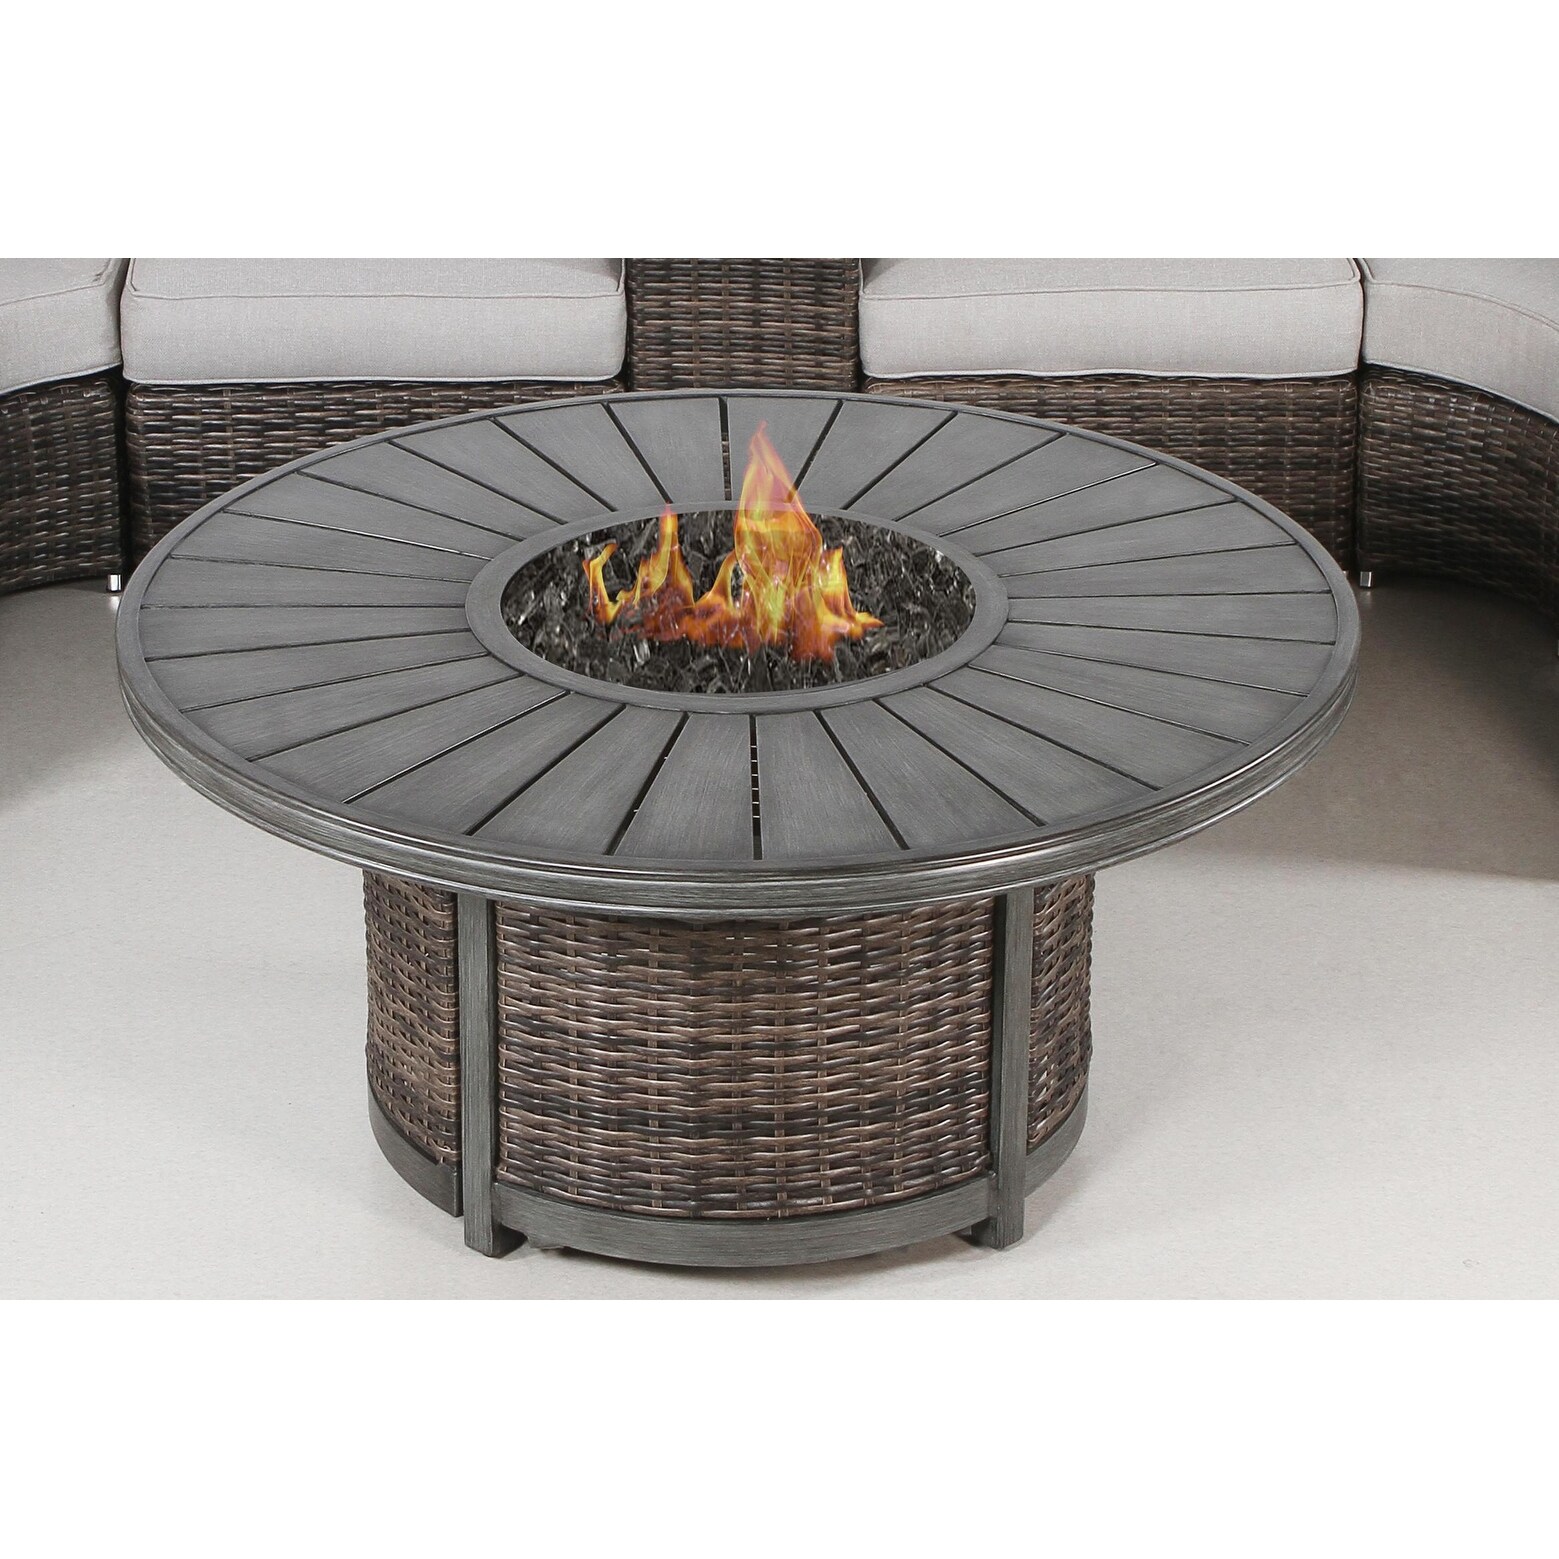 Living Source International LSI Propane Outdoor Fire Pit Table